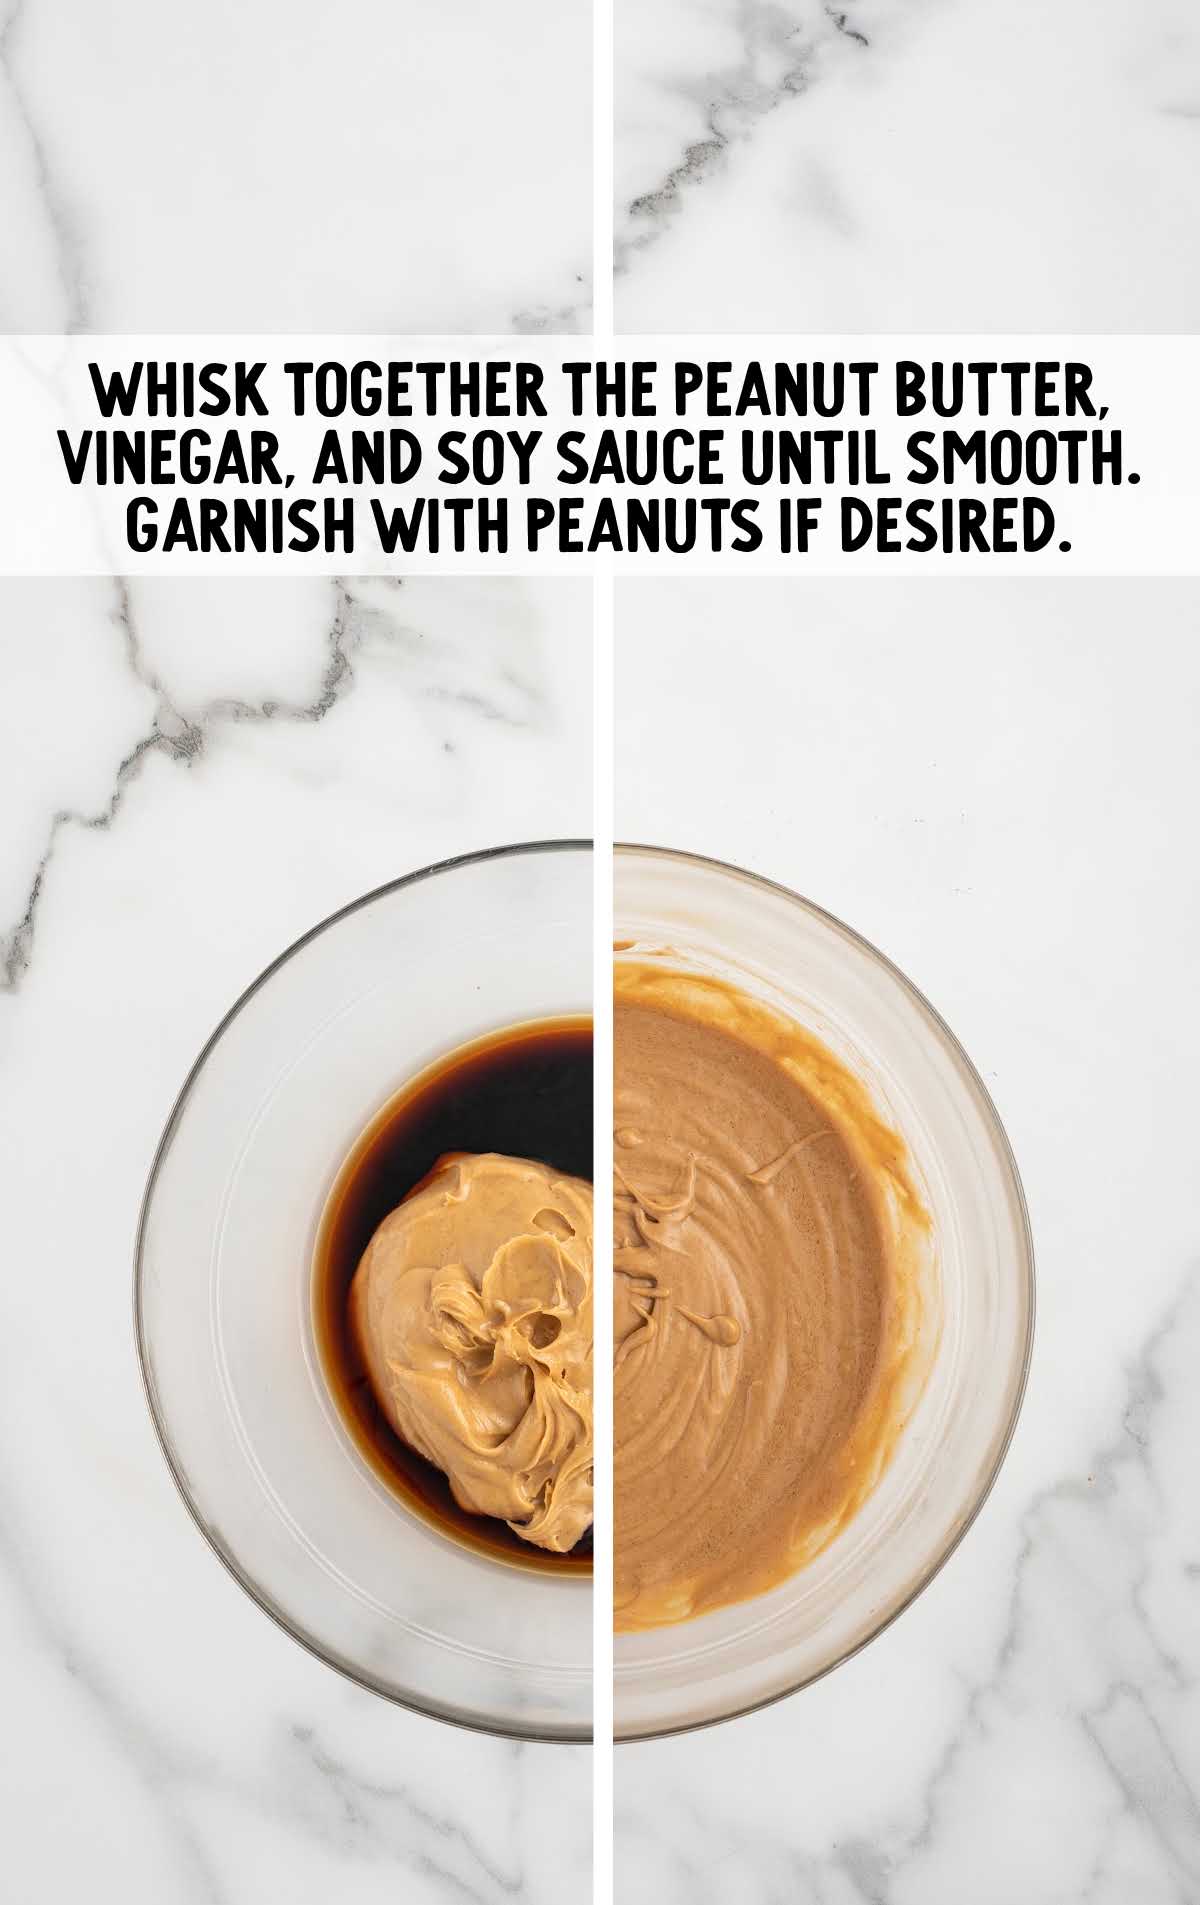 peanut butter, vinegar, and spy sauce, and peanuts (if desired) whisked together in a bowl